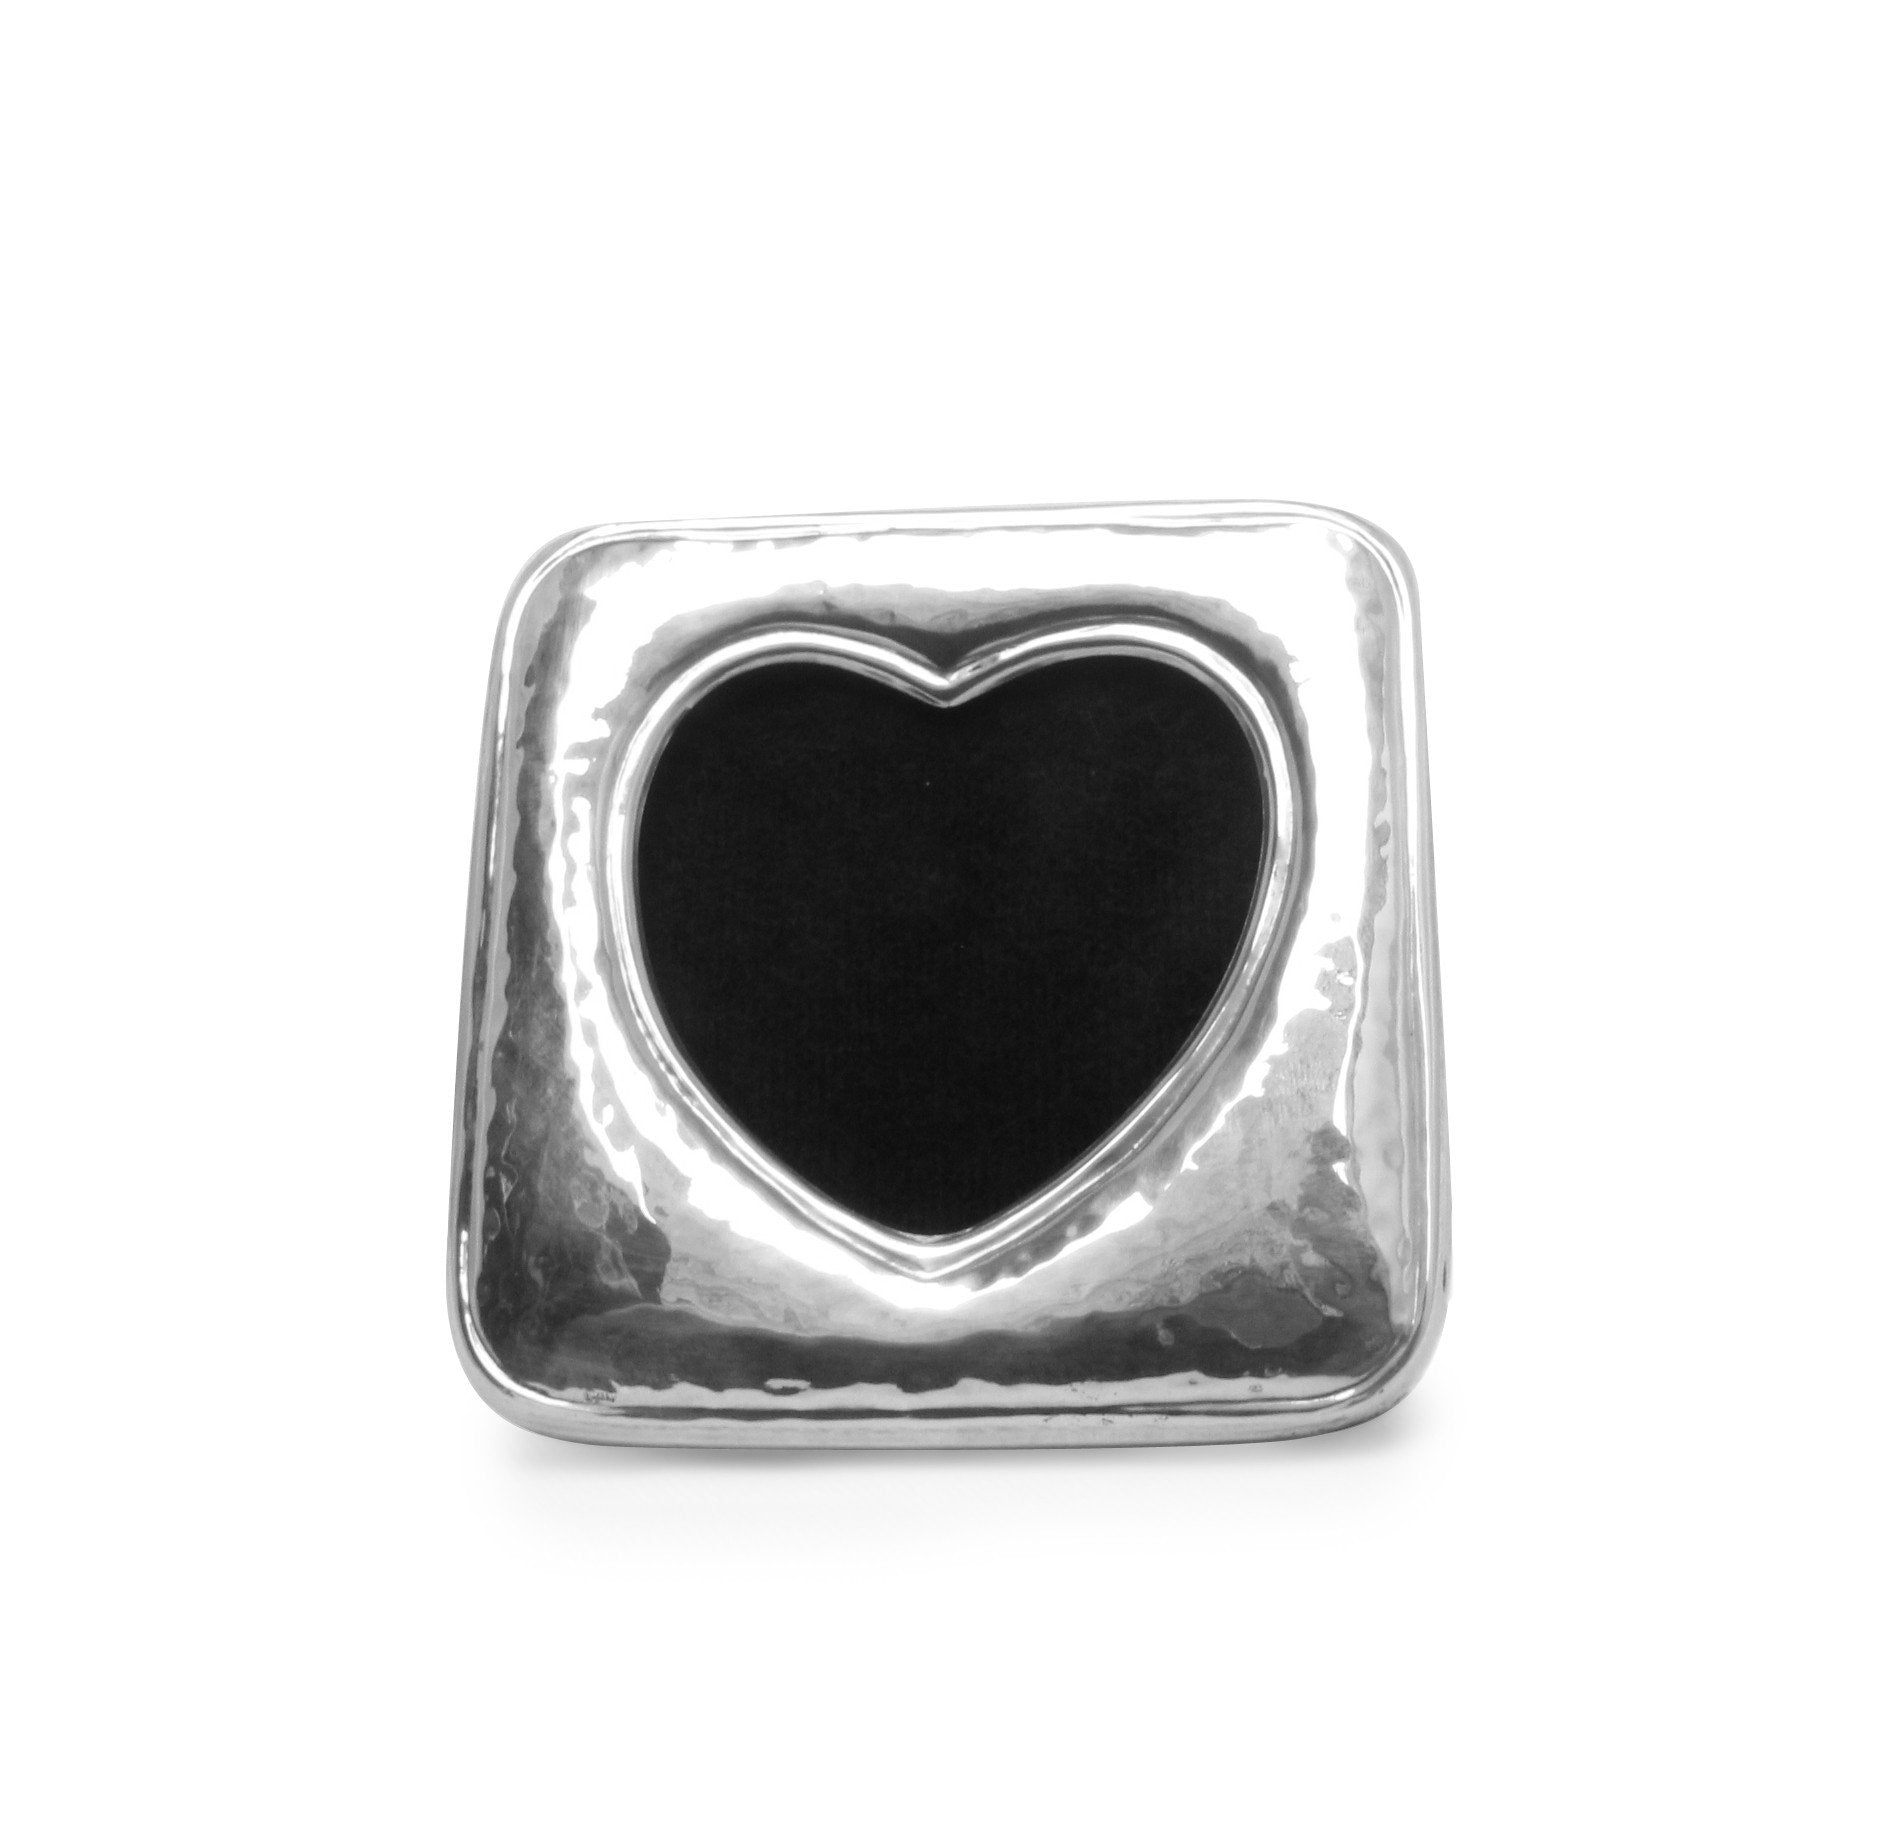 Heart Frame in Sterling Silver - Qinti - The Peruvian Shop